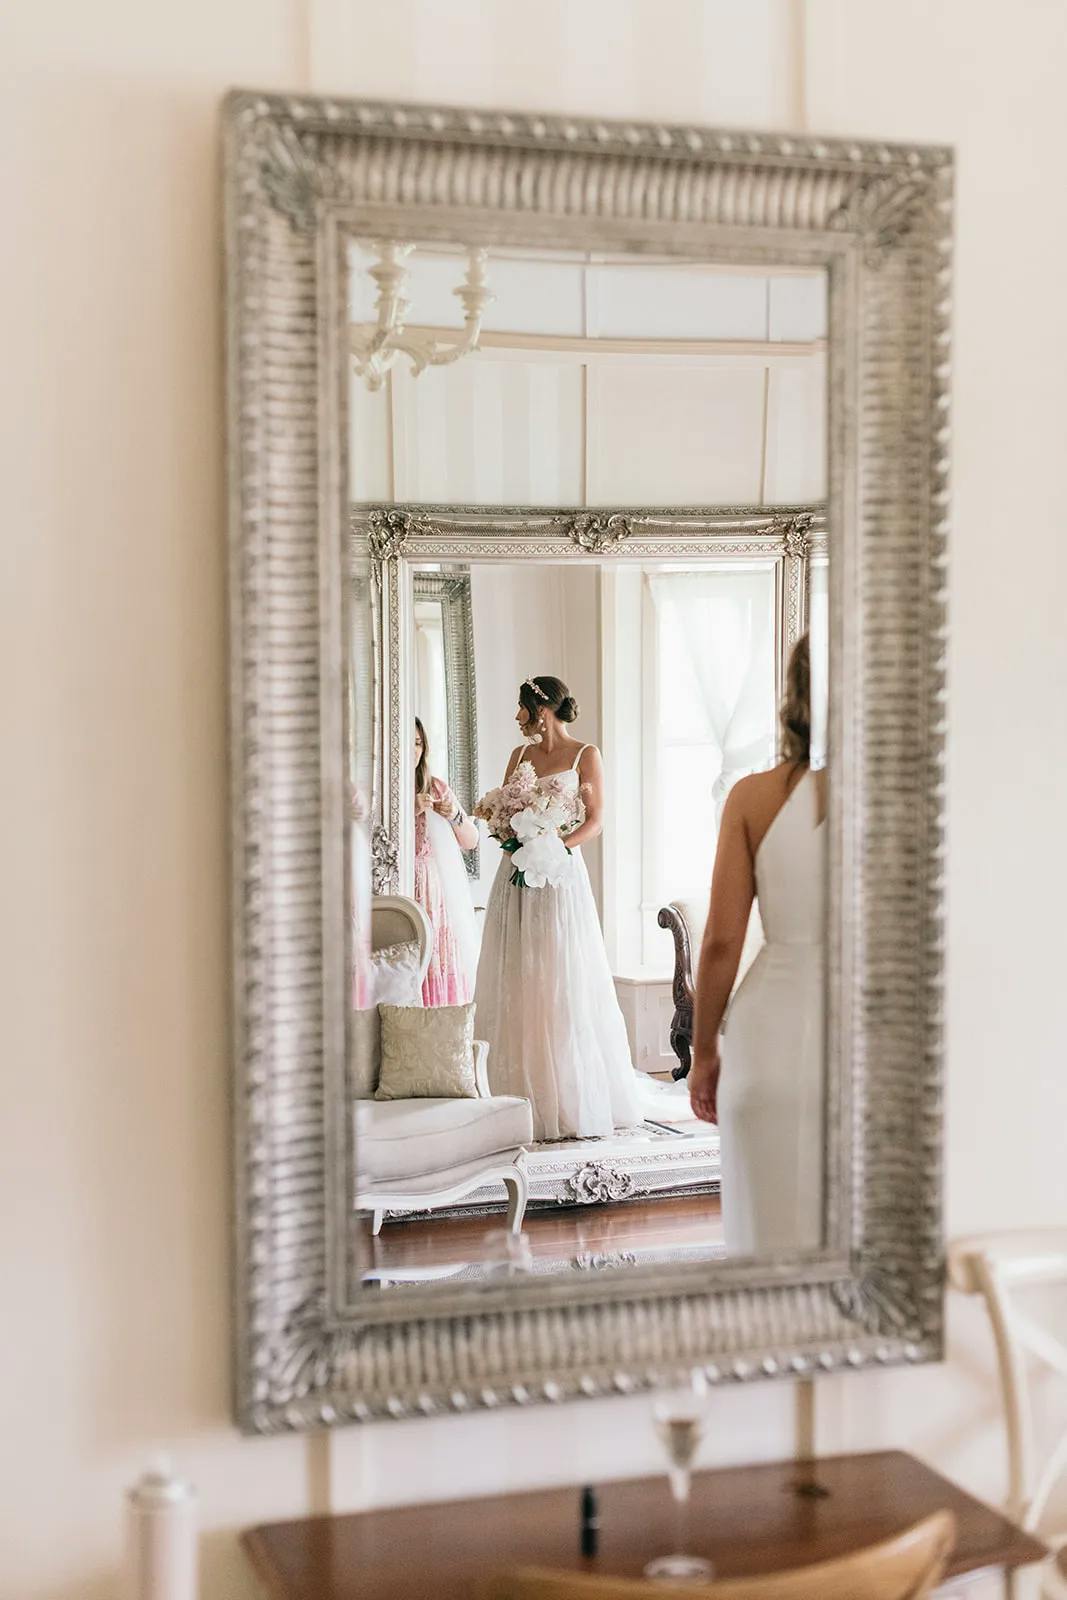 A bride stands in front of a large ornate mirror, holding a bouquet of white flowers and looking at herself. A bridesmaid in a white dress stands nearby. The scene is reflected in the mirror, with elegant furniture and soft lighting in the background.